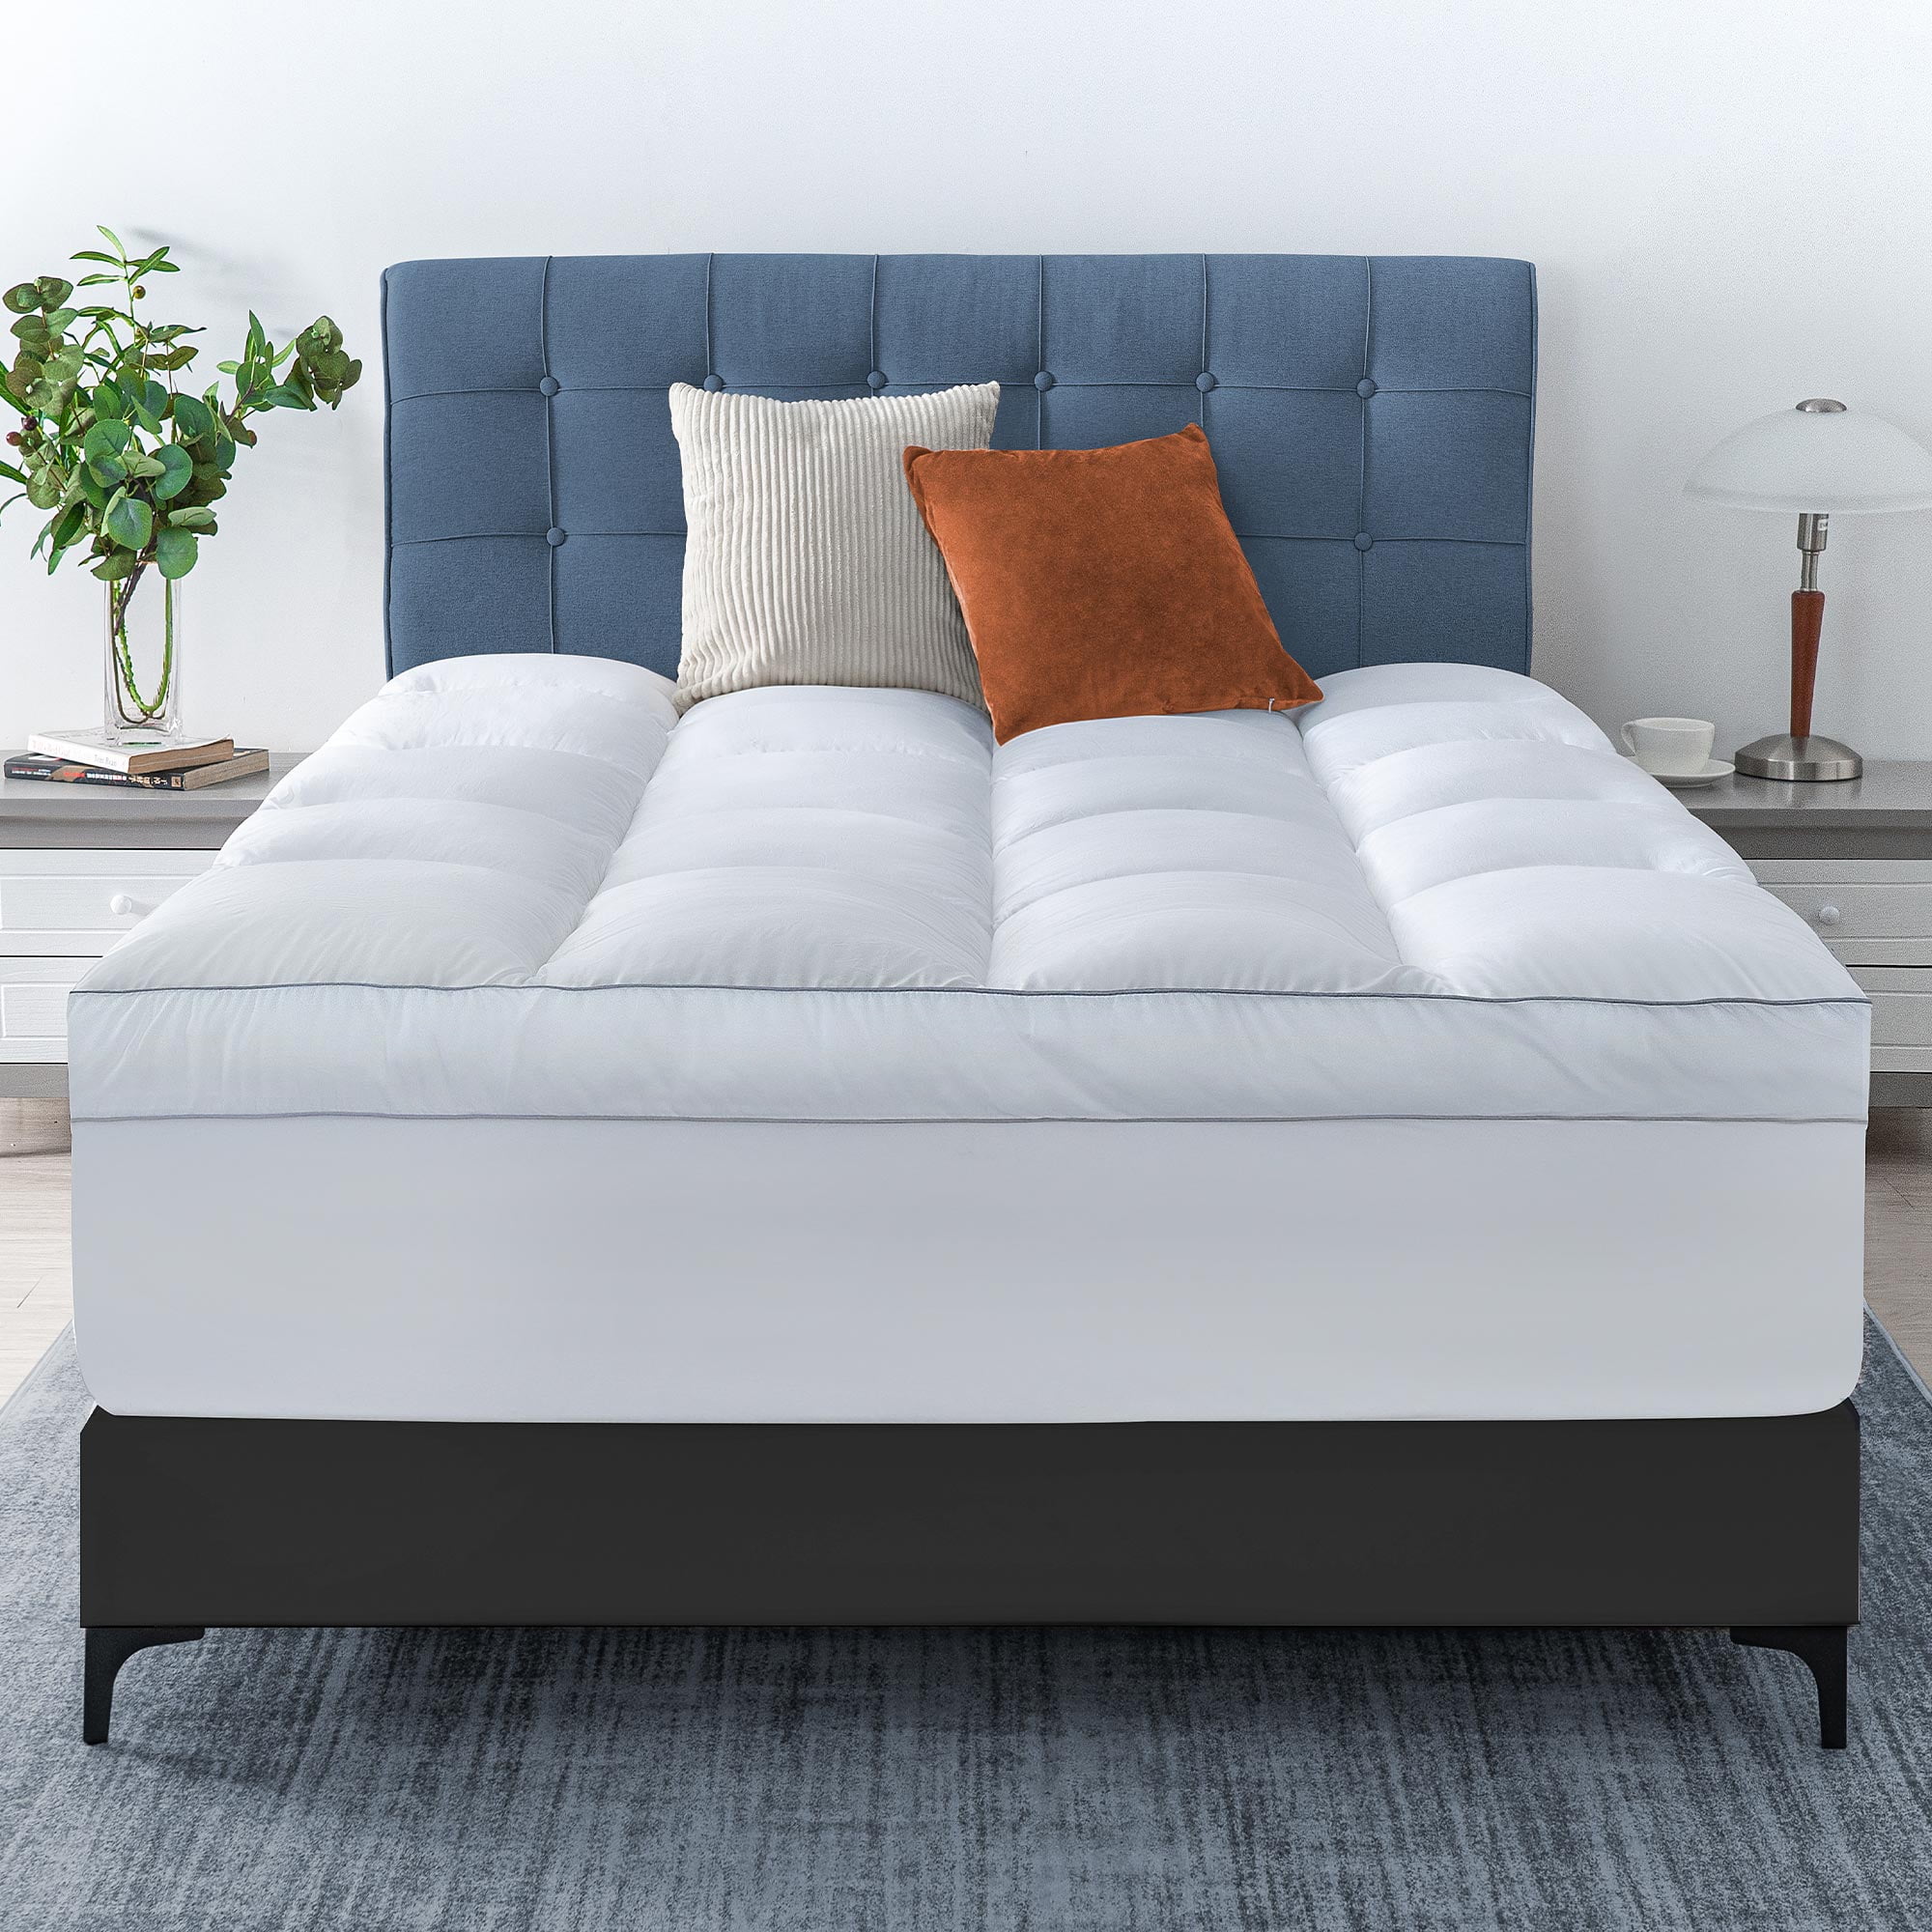 Details about   3 Inch Egg Crate Copper Infused Memory Foam Mattress Topper Antimicrobial Fresh 